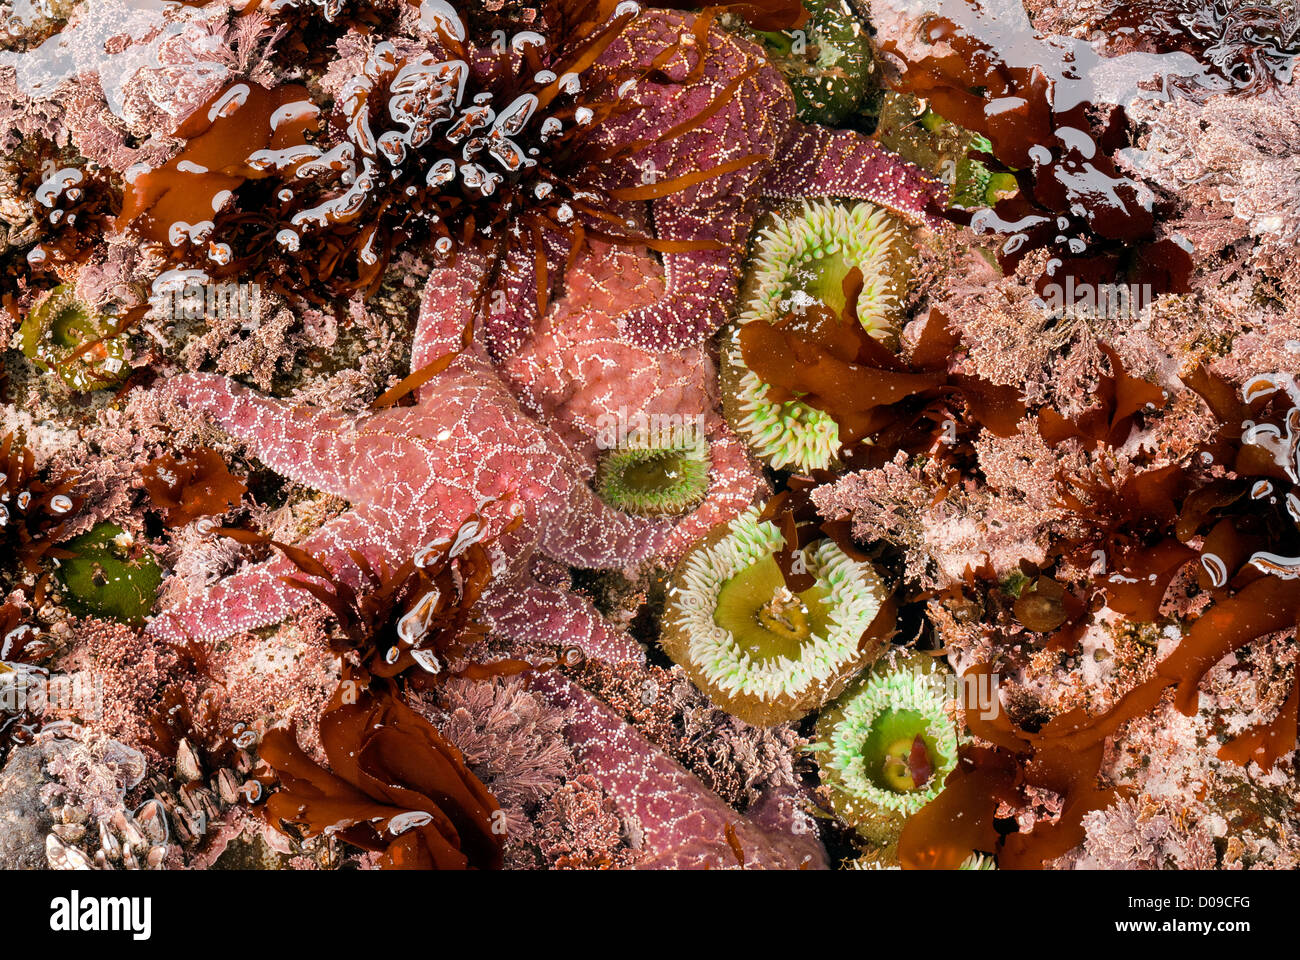 Ochre sea stars and Giant Green anemones in tidepool in the intertidal zone along the wilderness coast in Olympic National Park. Stock Photo